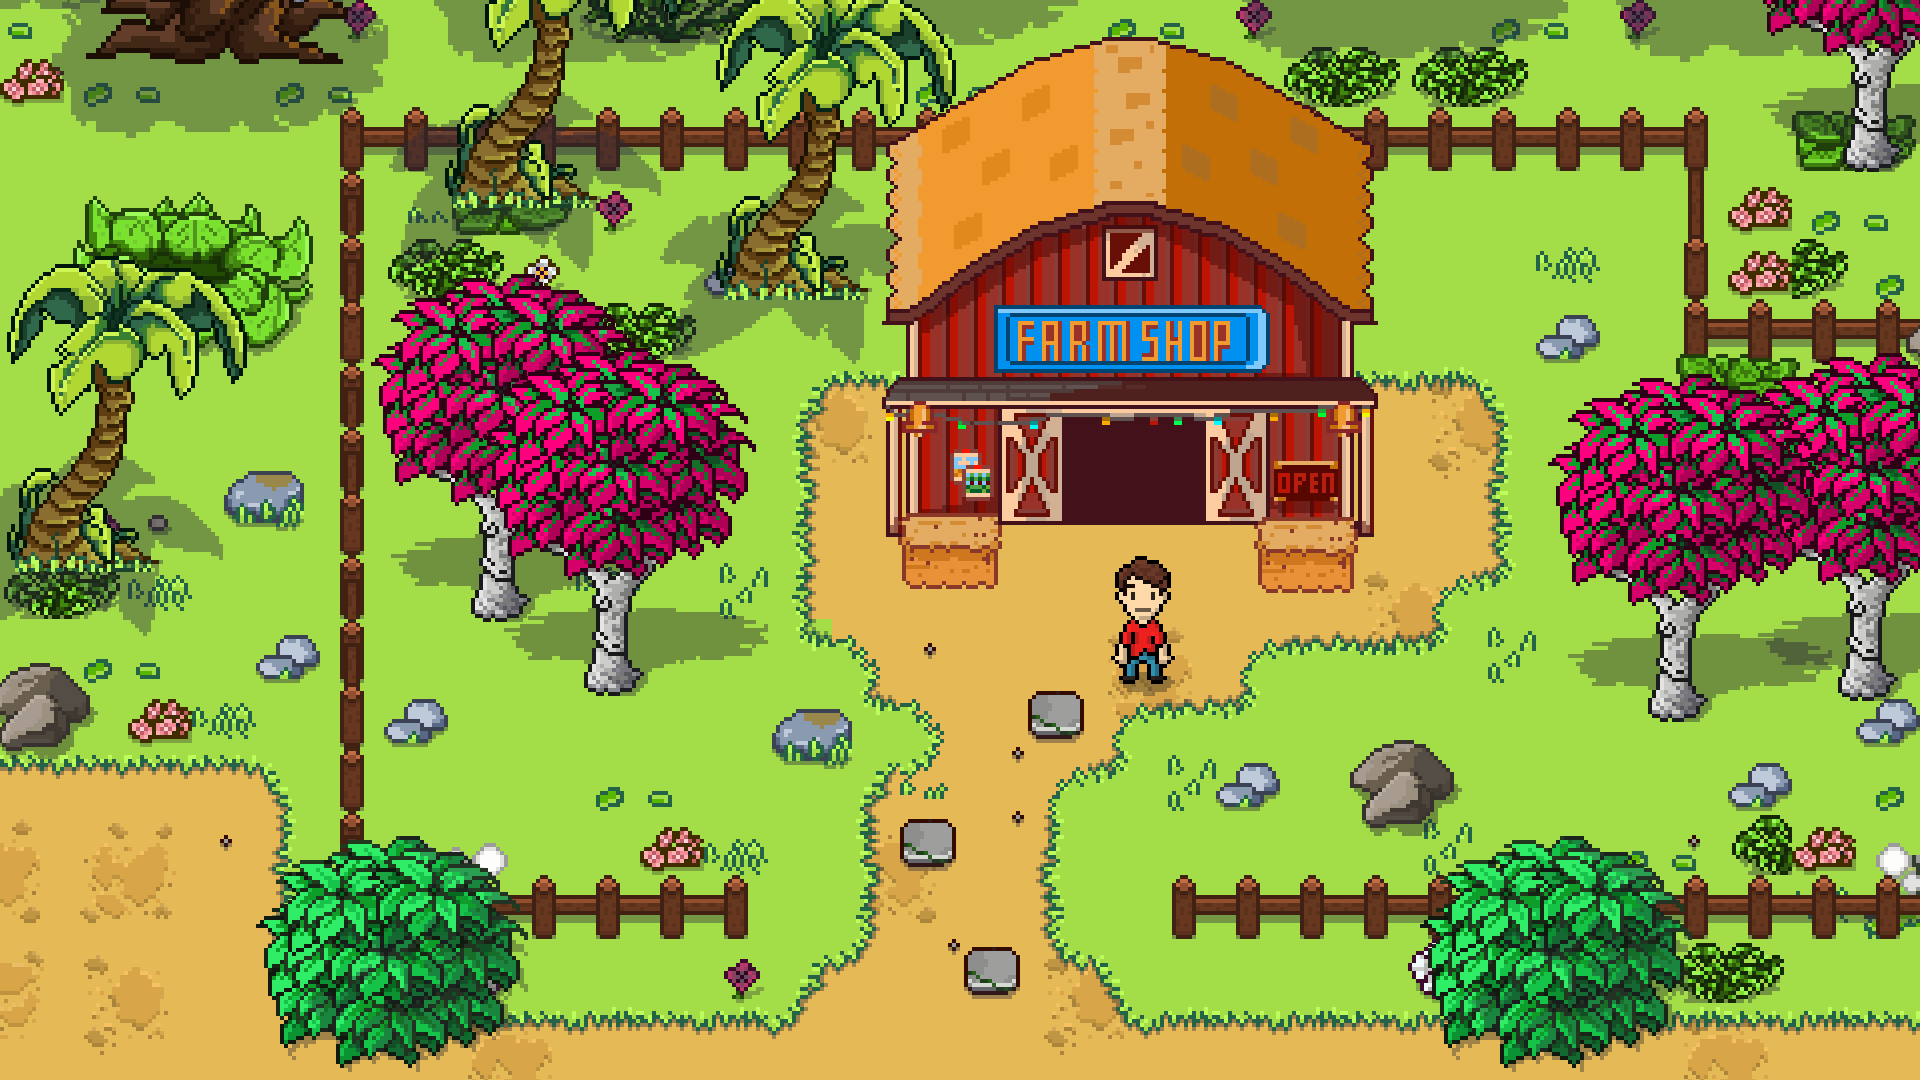 Main character standing by the farm shop